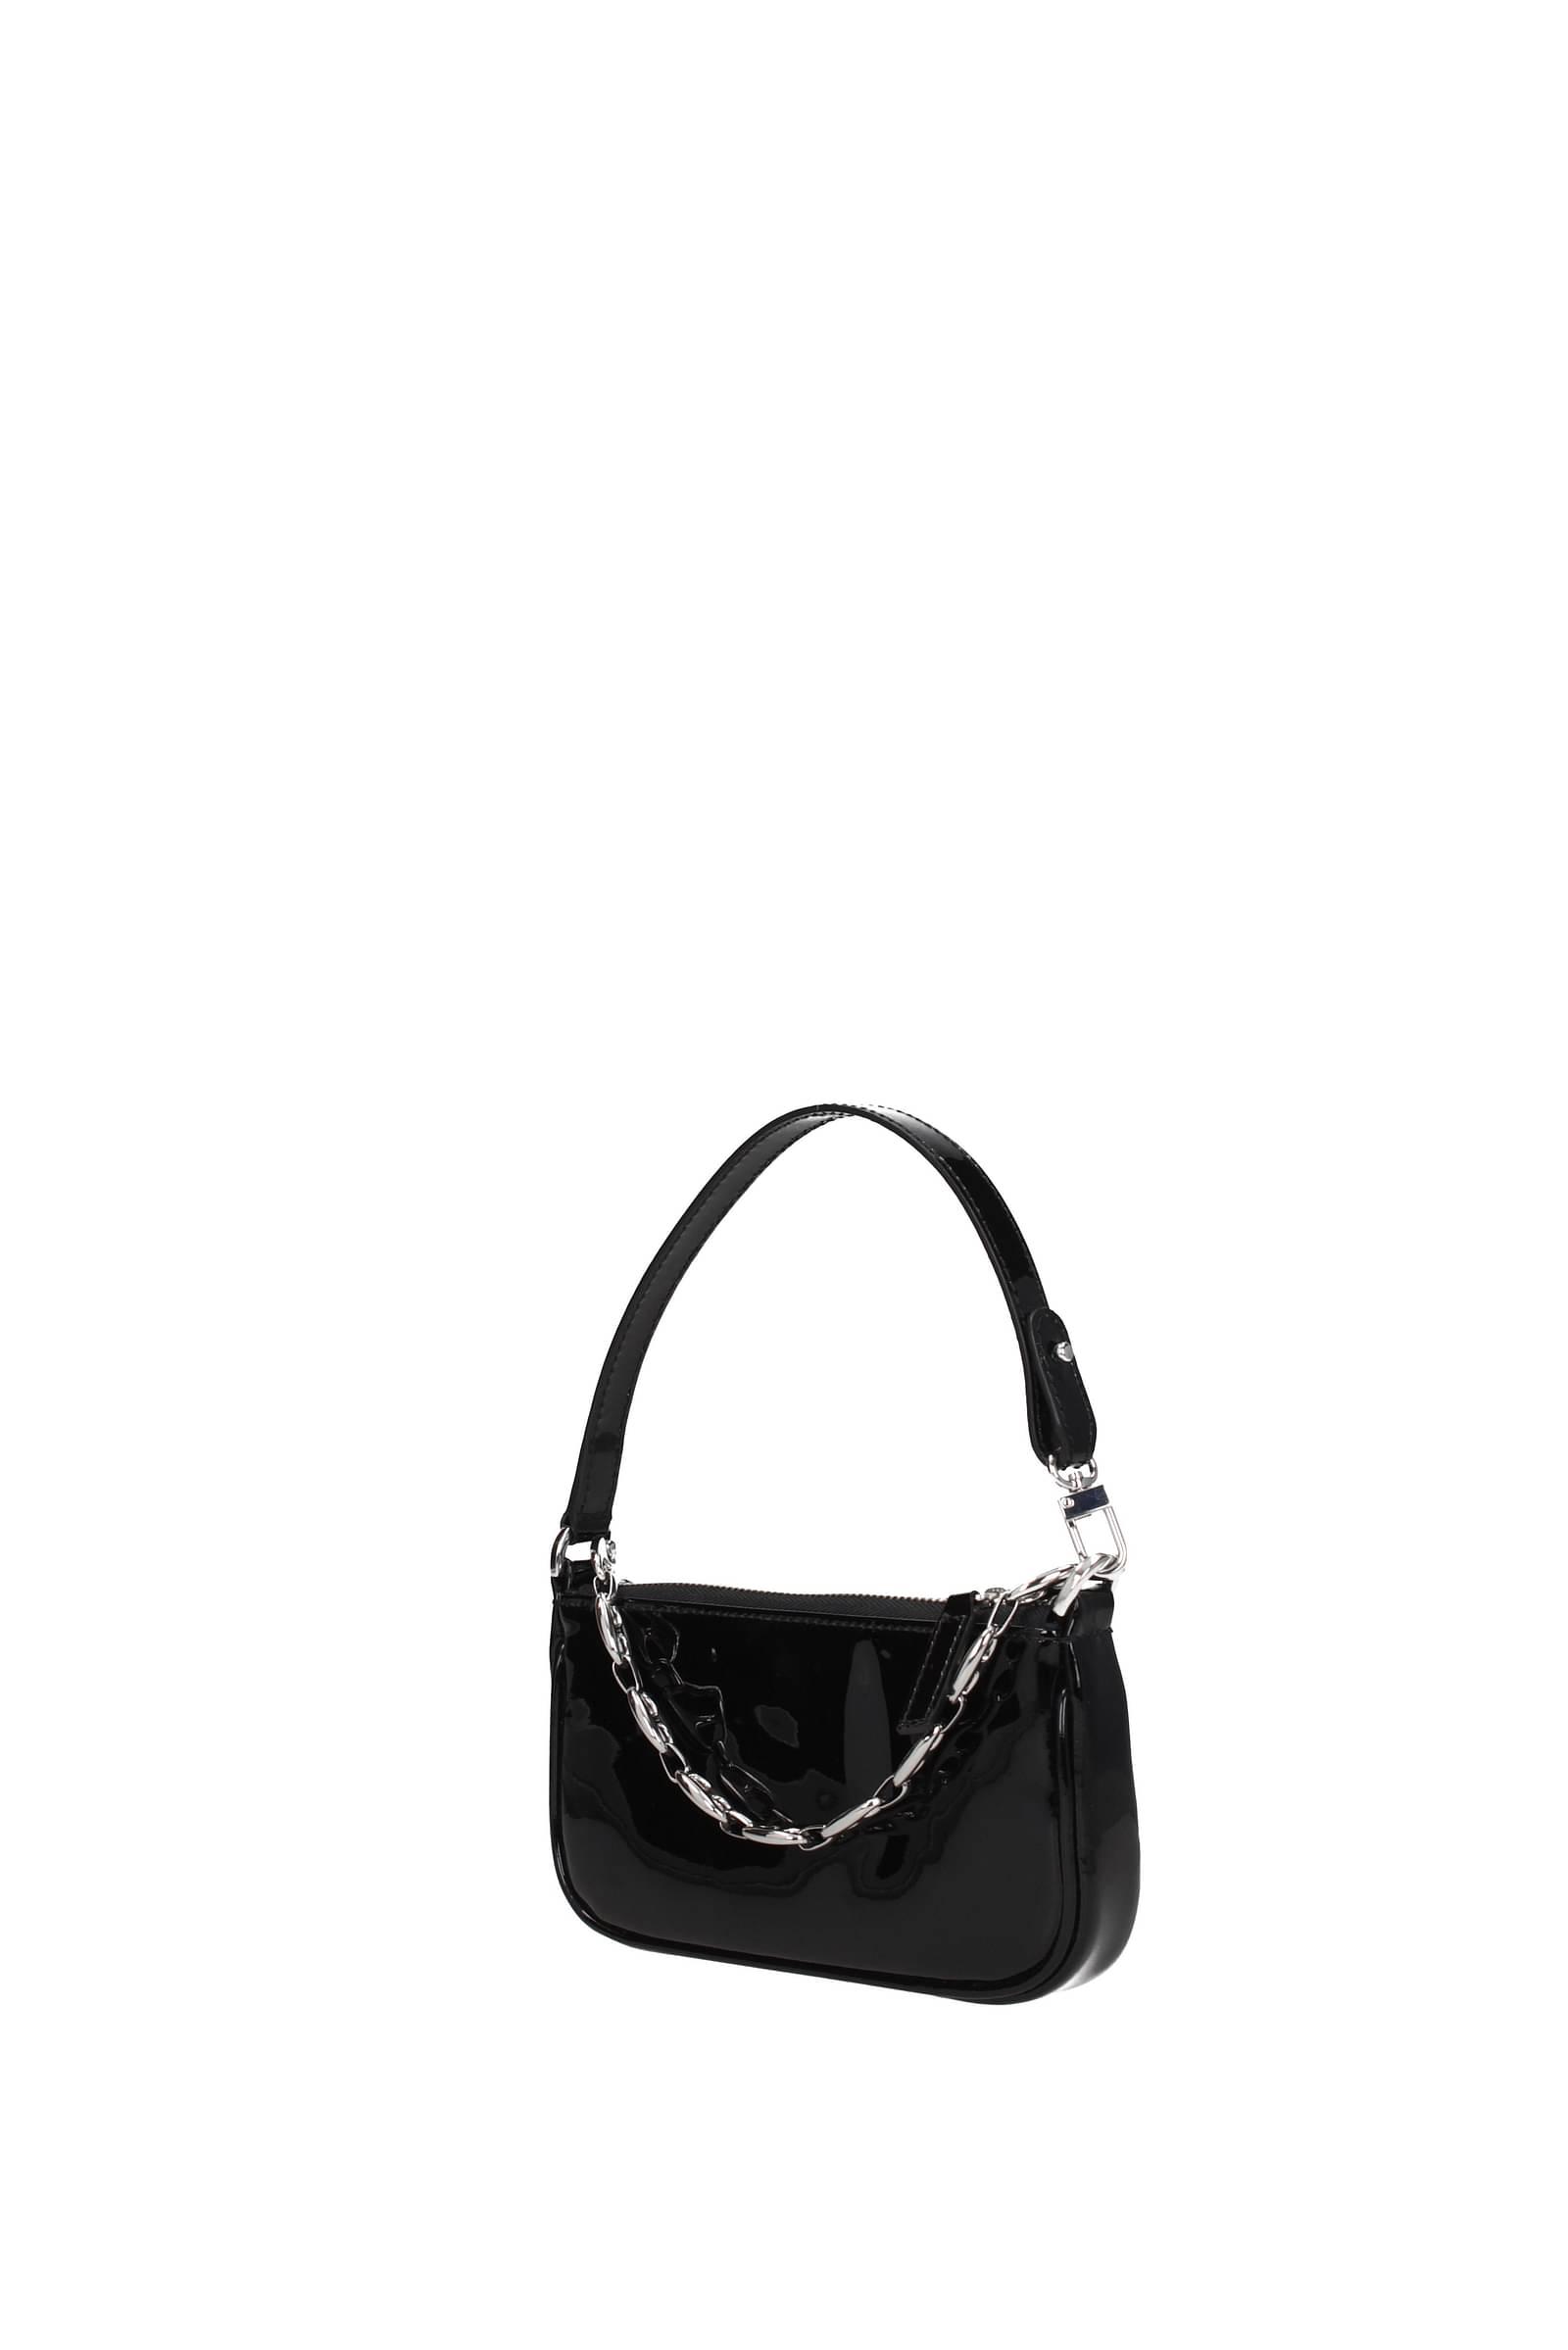 BY FAR, Bags, By Far Rachel Bag In Black With Gold Hardware